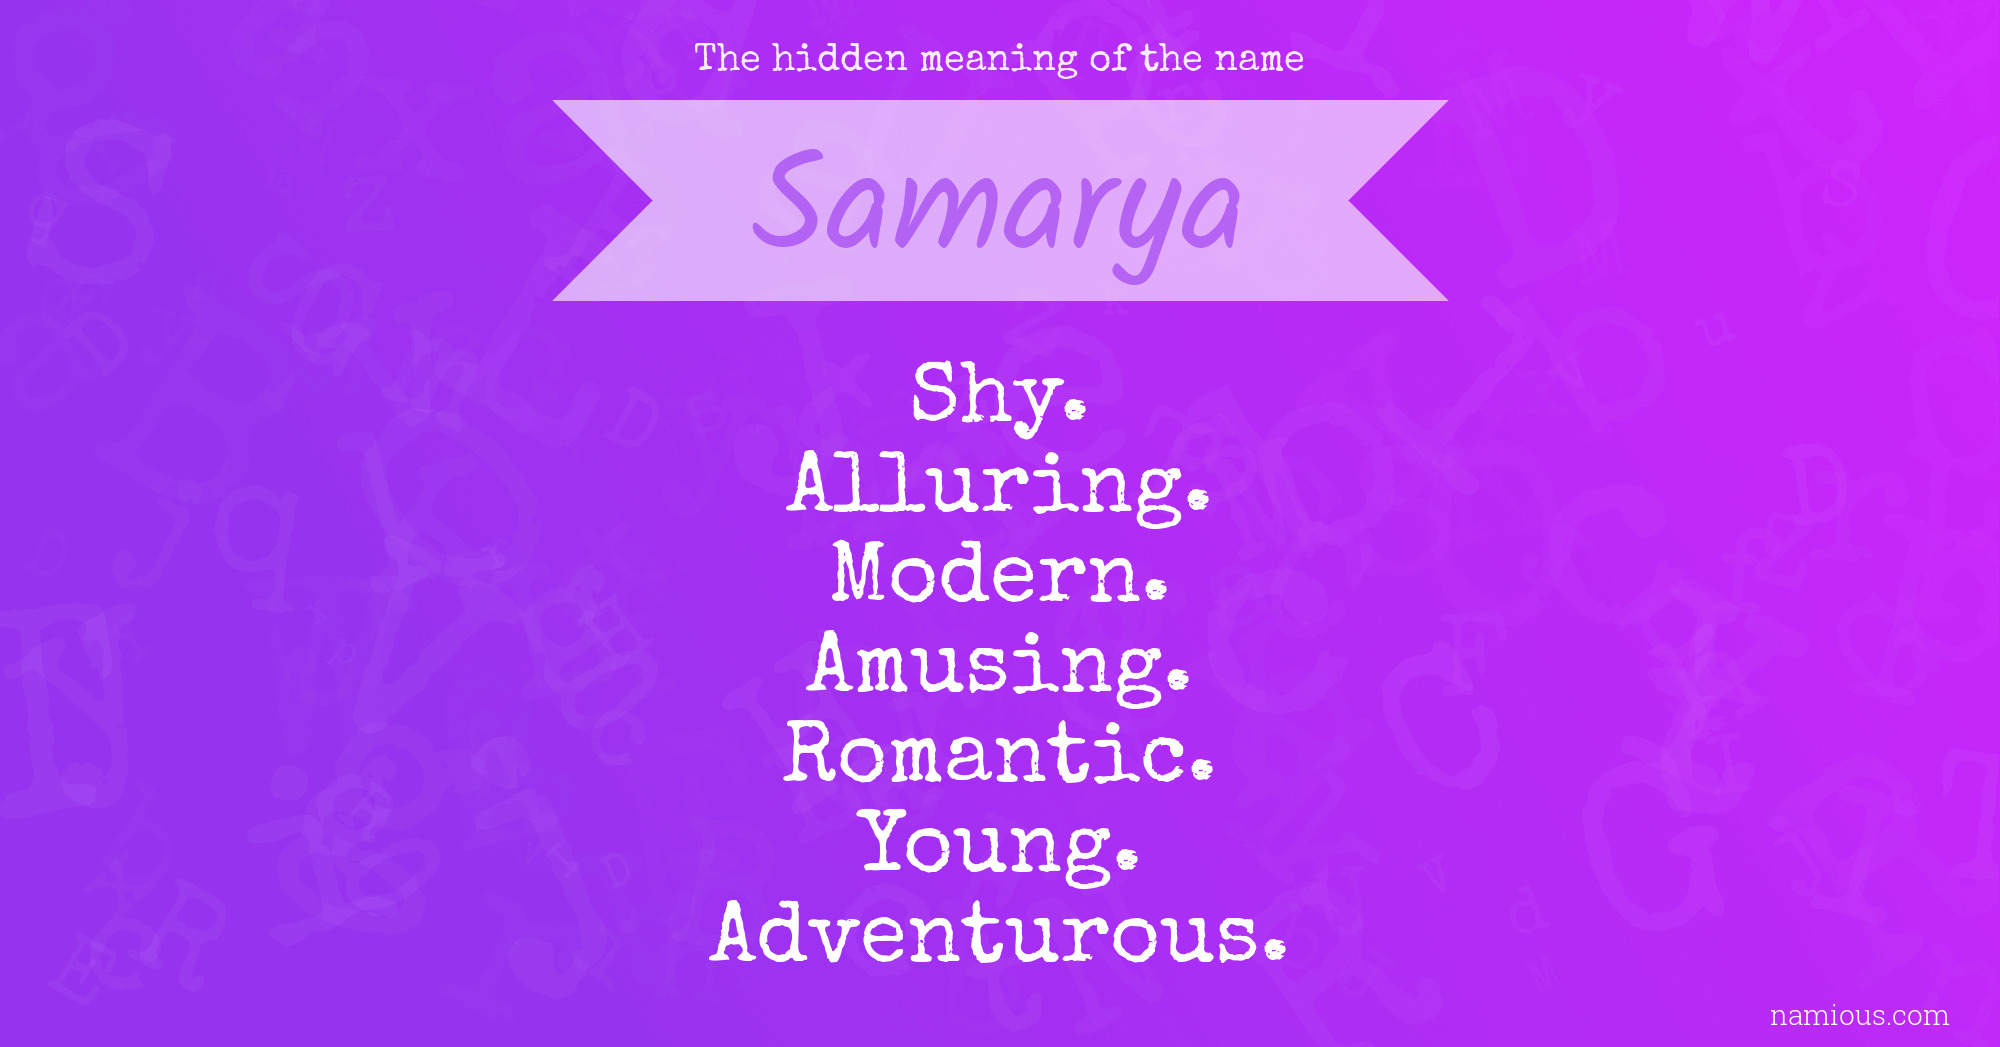 The hidden meaning of the name Samarya